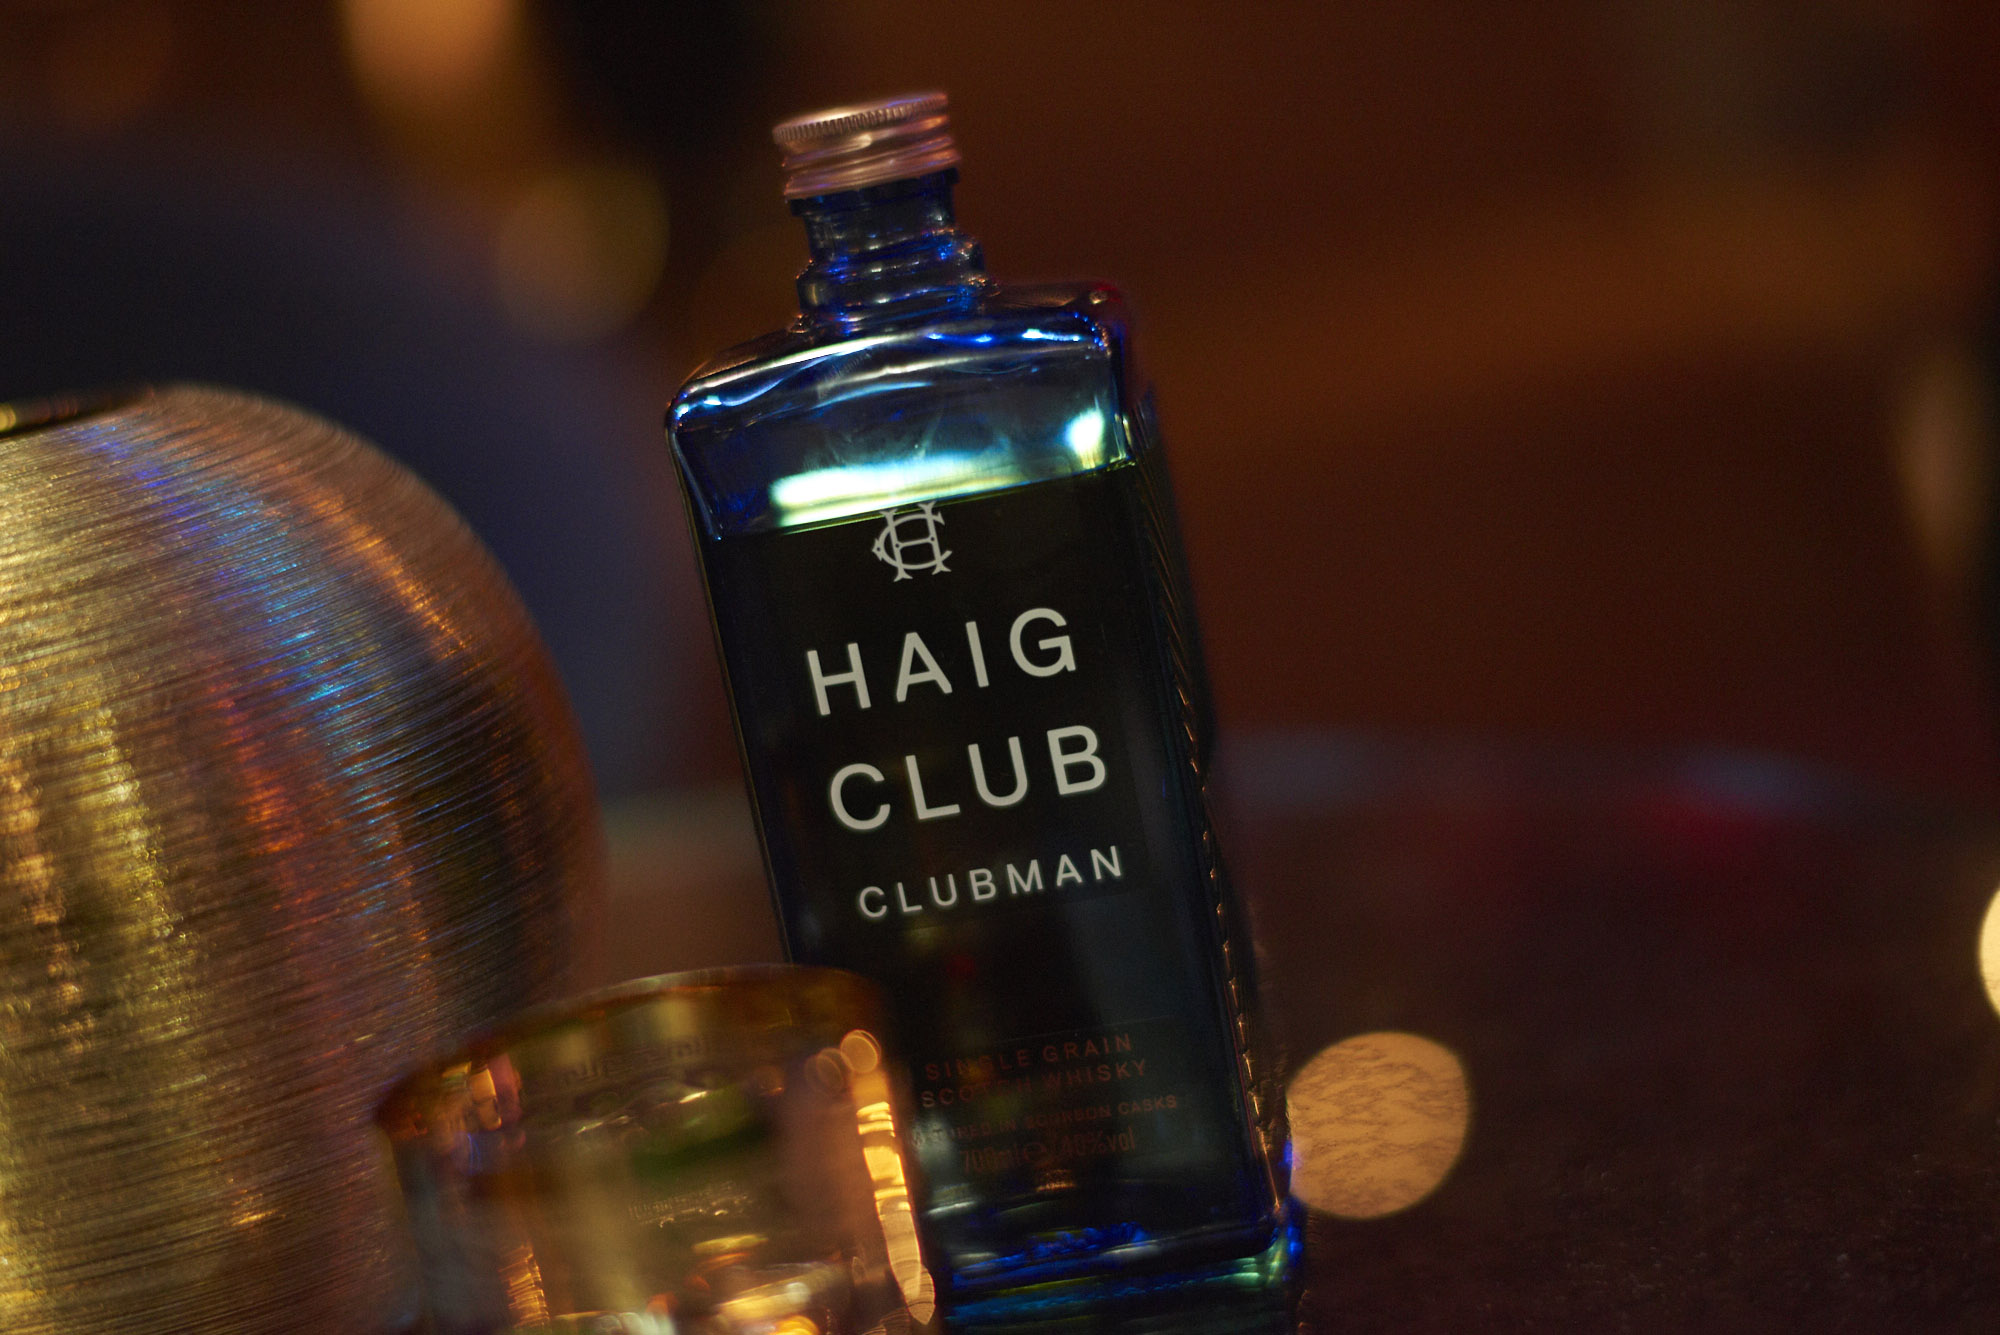 HAIG CLUB Releases A Night Out With David Beckham…In Reverse